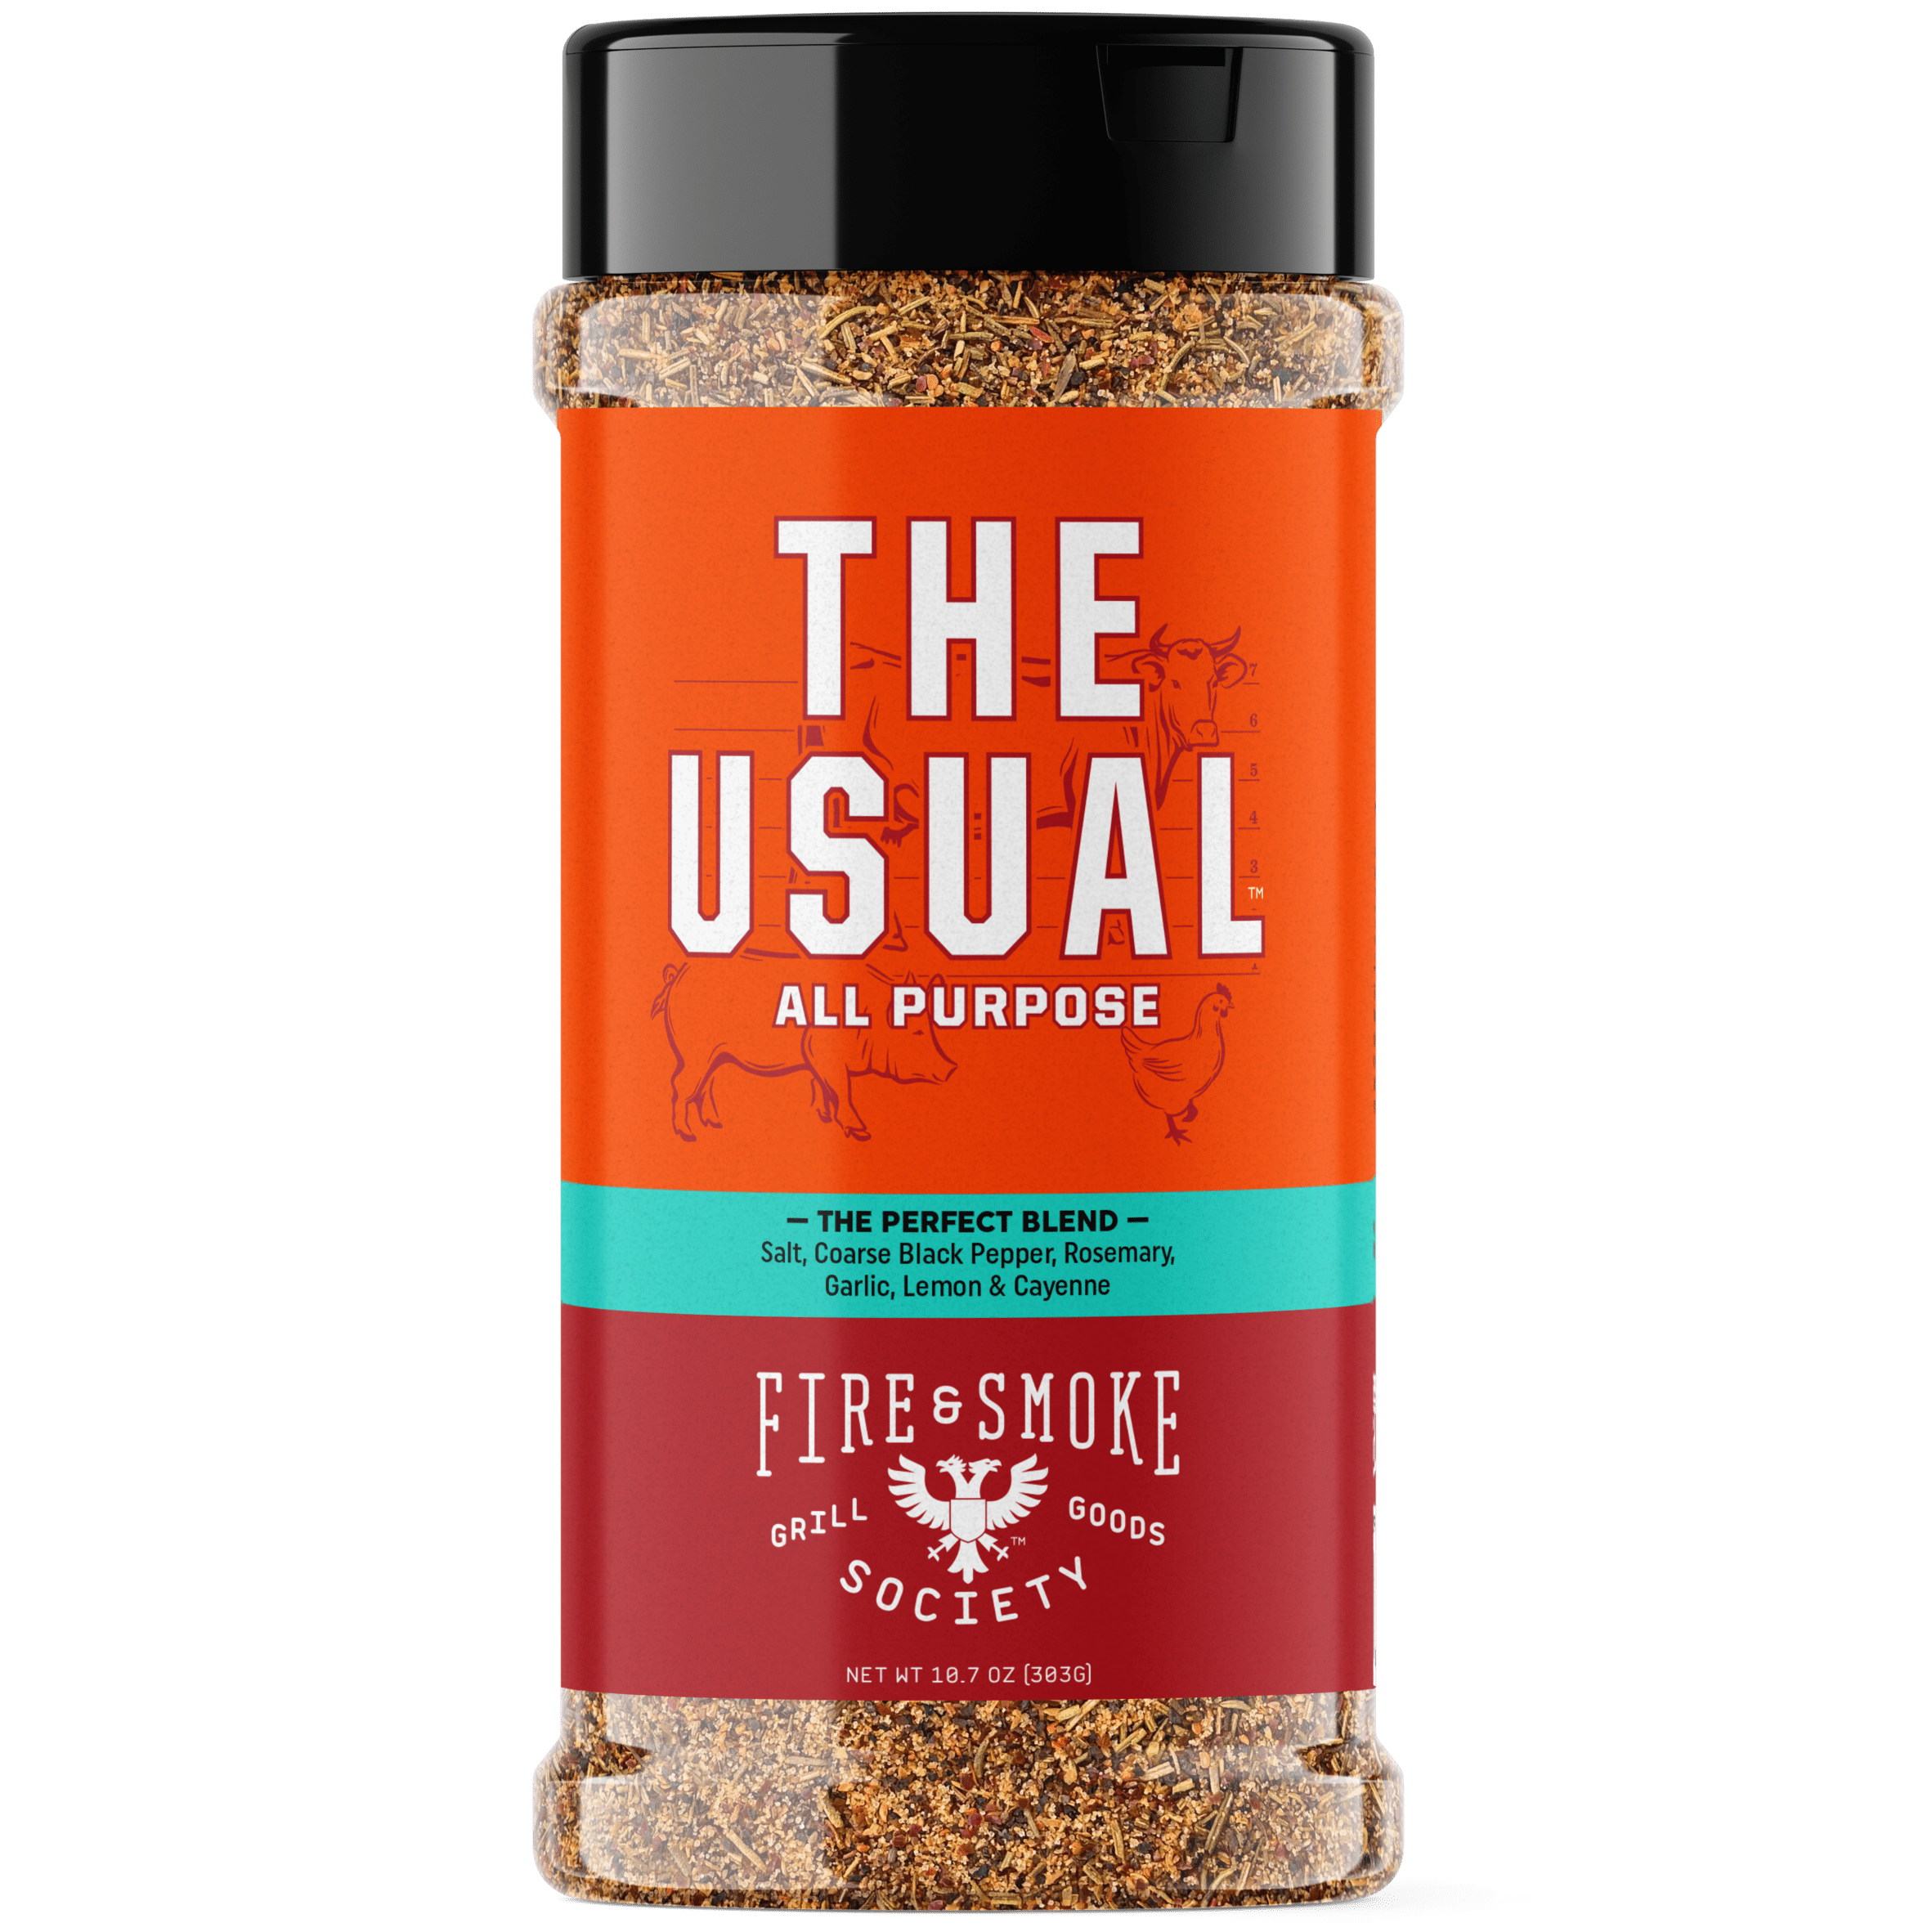 Fire & Smoke Society The Usual All-Purpose Spice Blend, 10.7oz